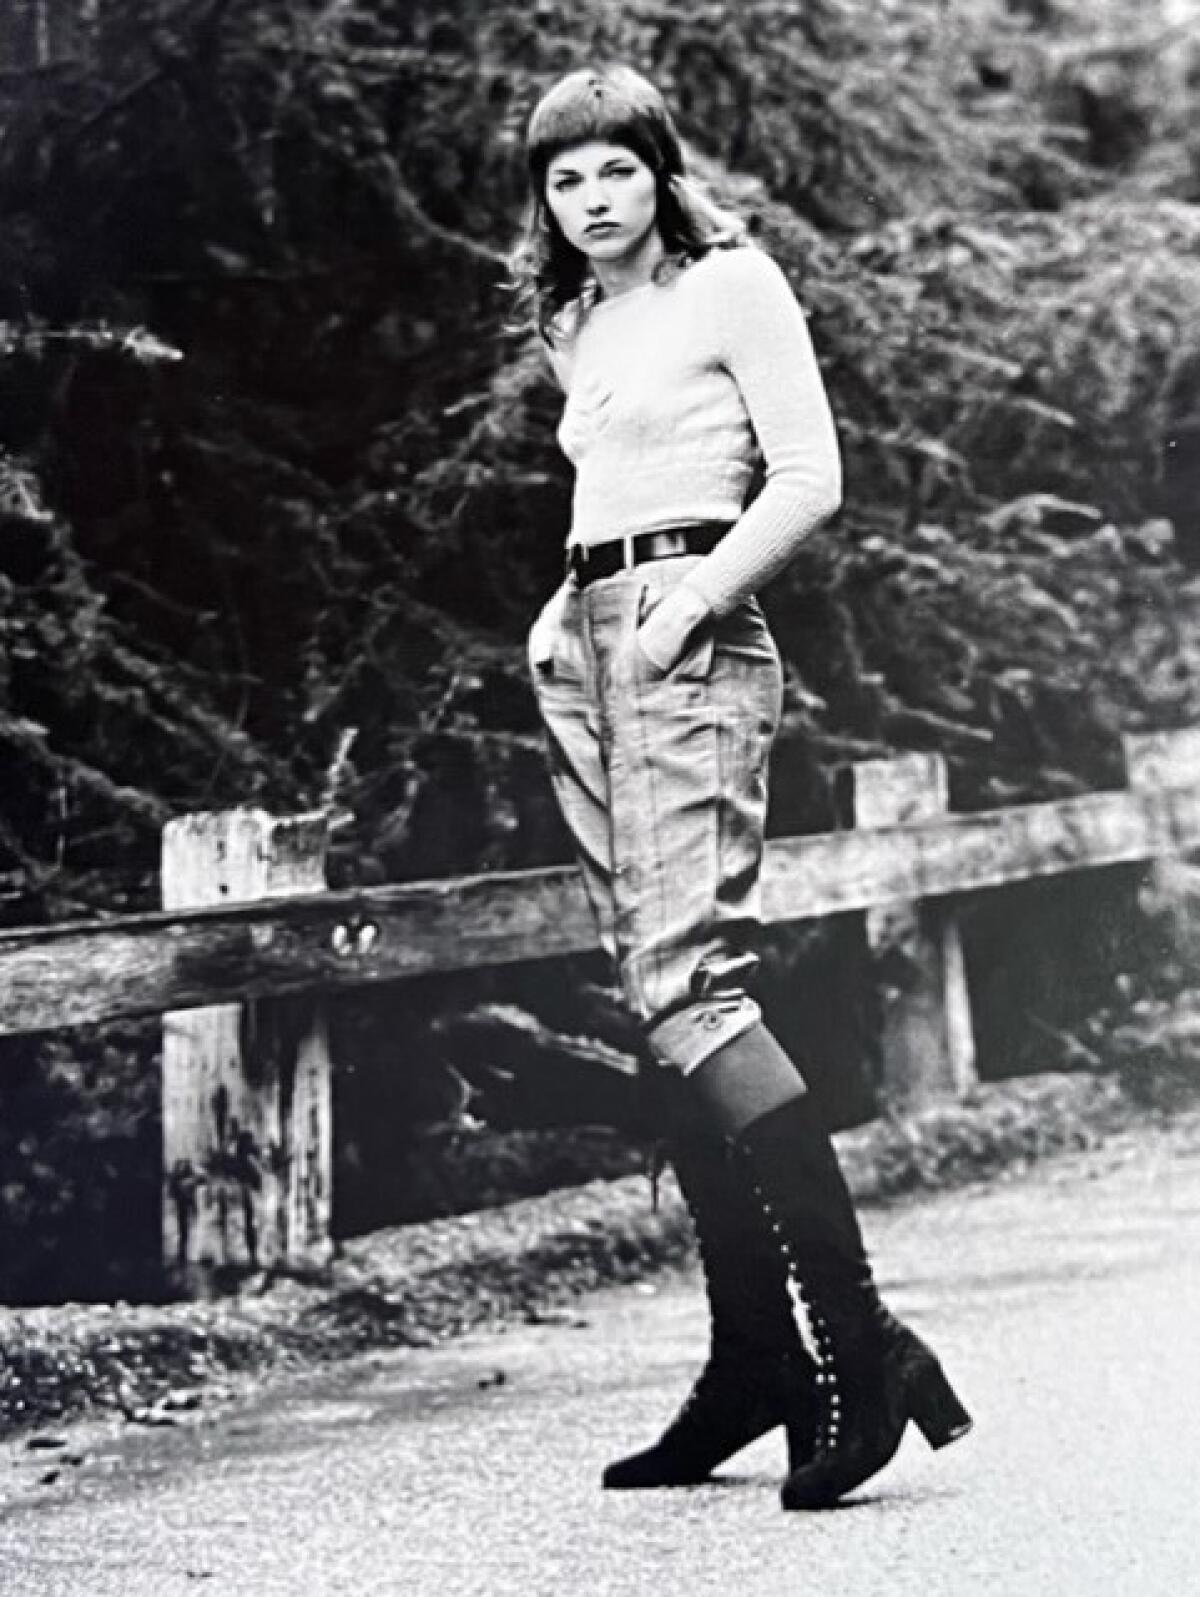 A young woman with long hair and wearing knickers and lace-up boots stands on a rural street.